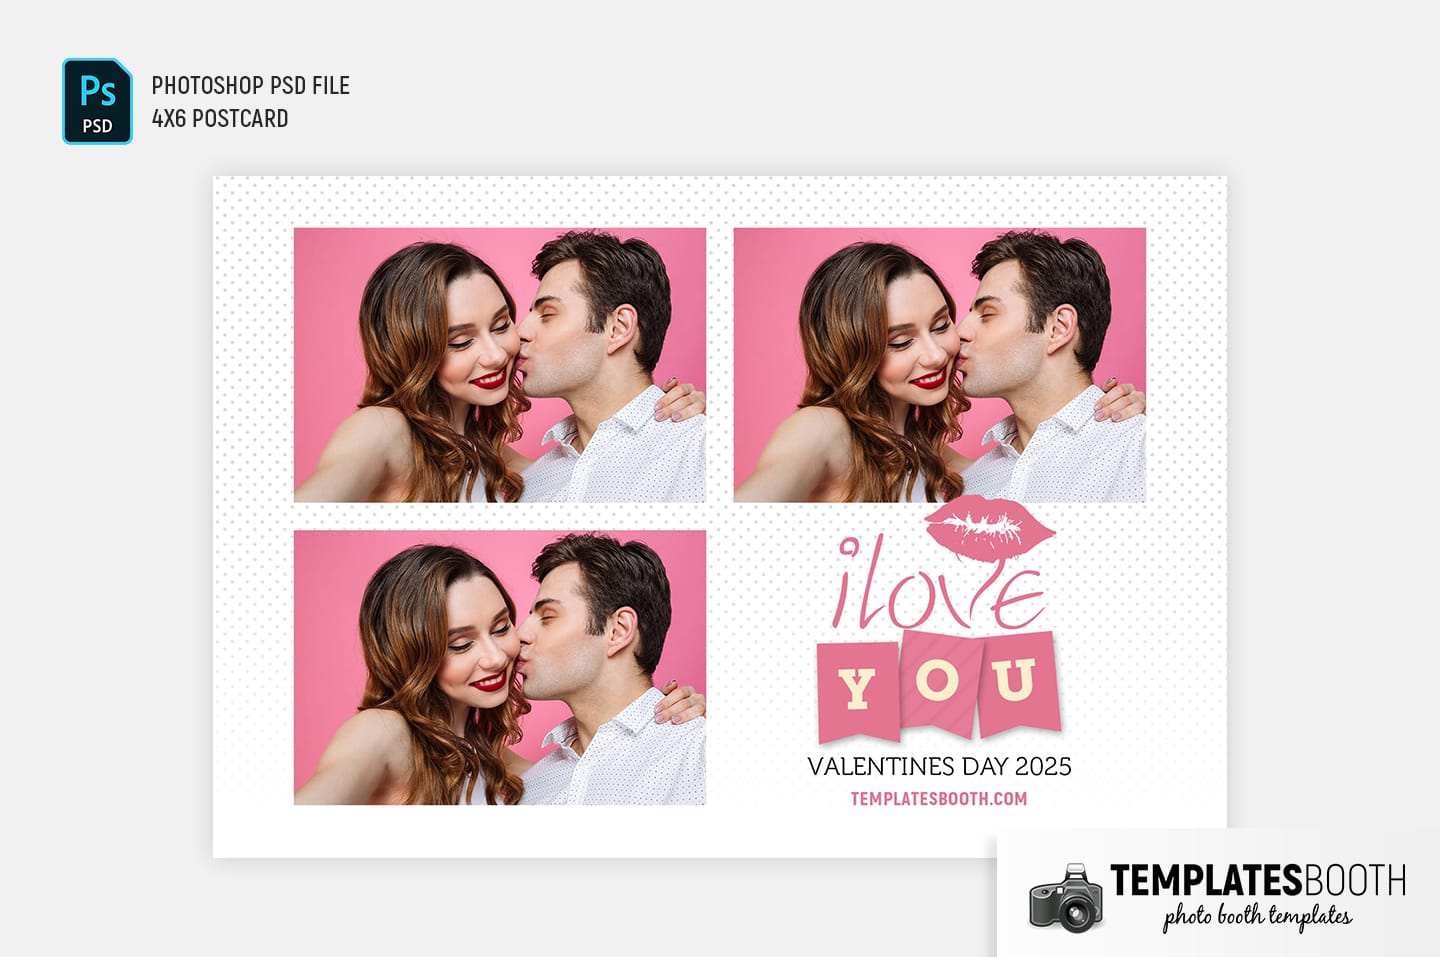 Valentines Kiss Photo Booth Template (4x6 postcard)